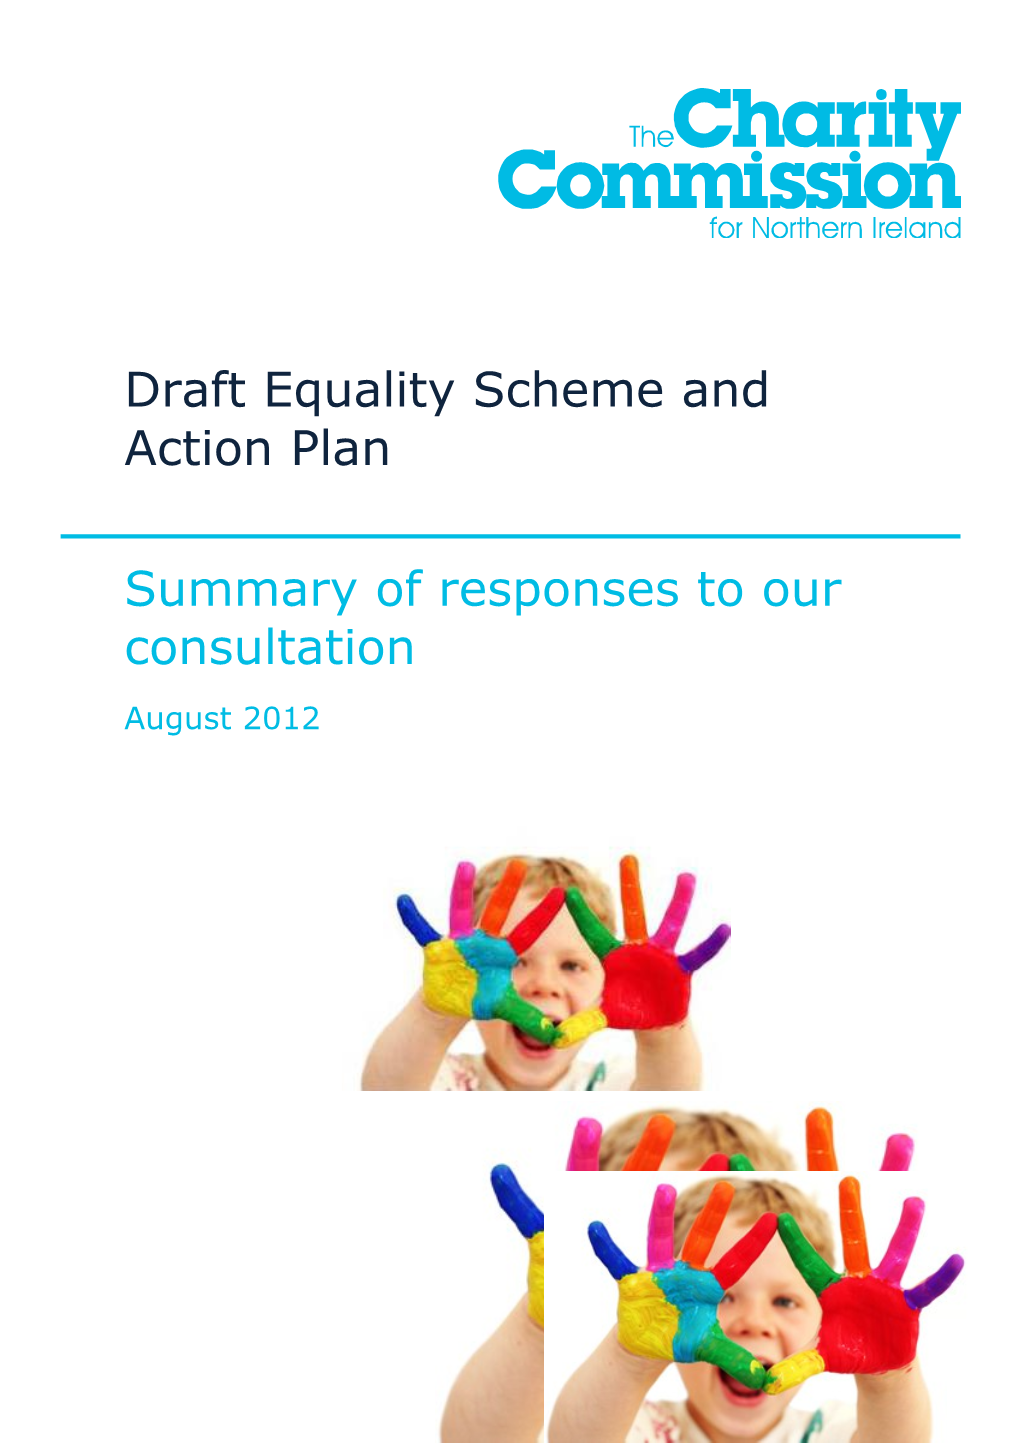 Draft Equality Scheme and Action Plan